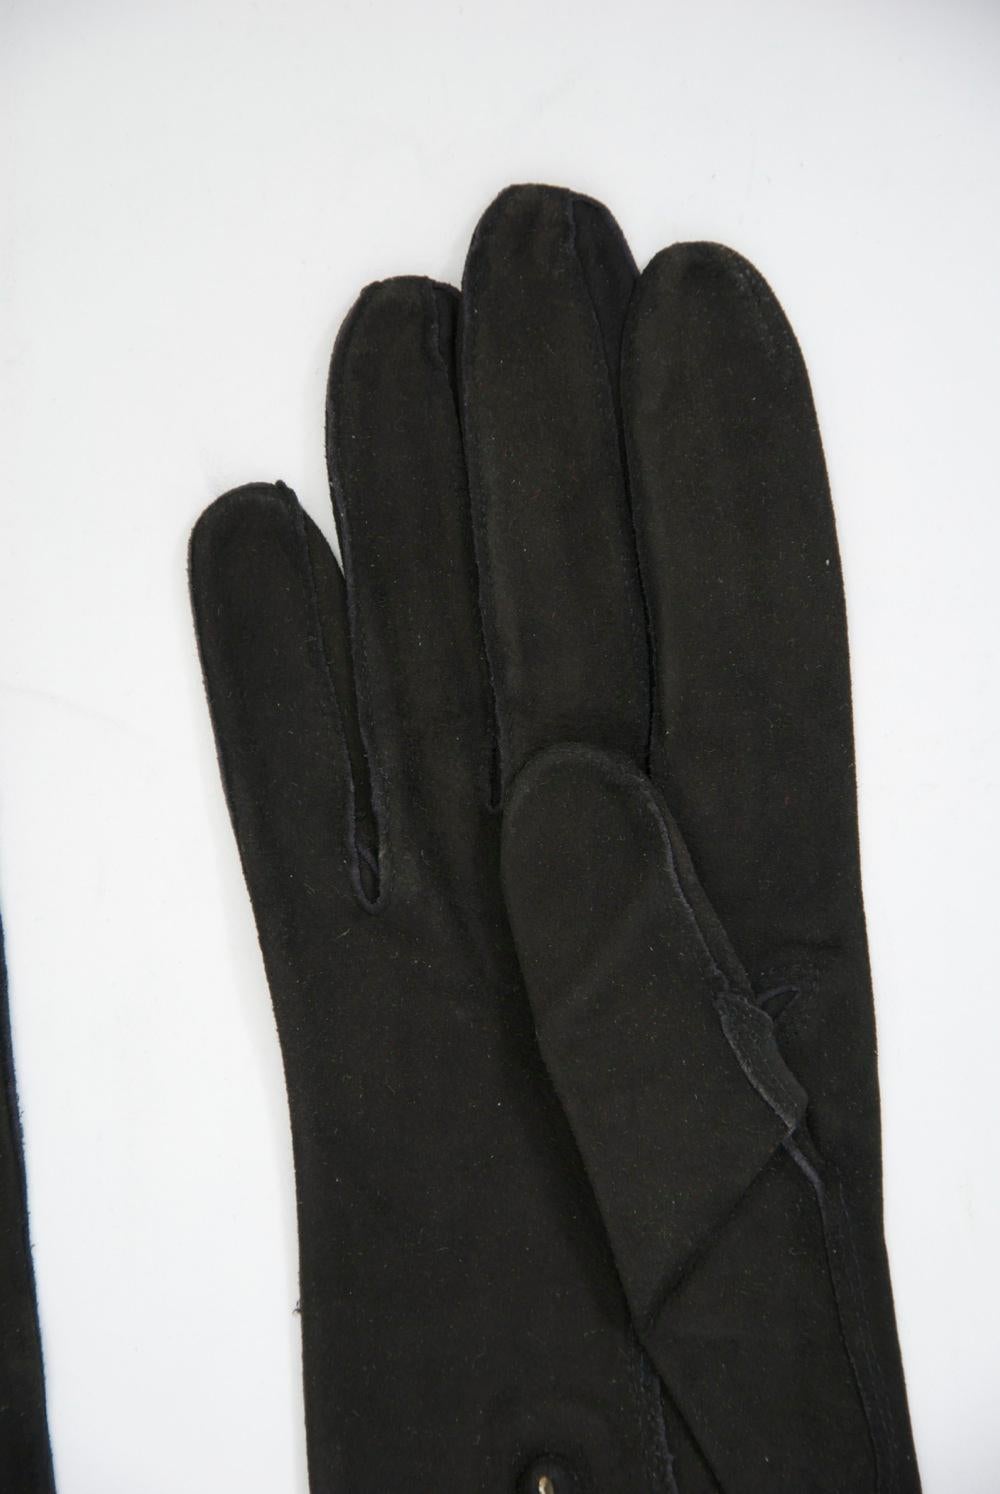 Black Suede Opera Gloves In Good Condition For Sale In Alford, MA